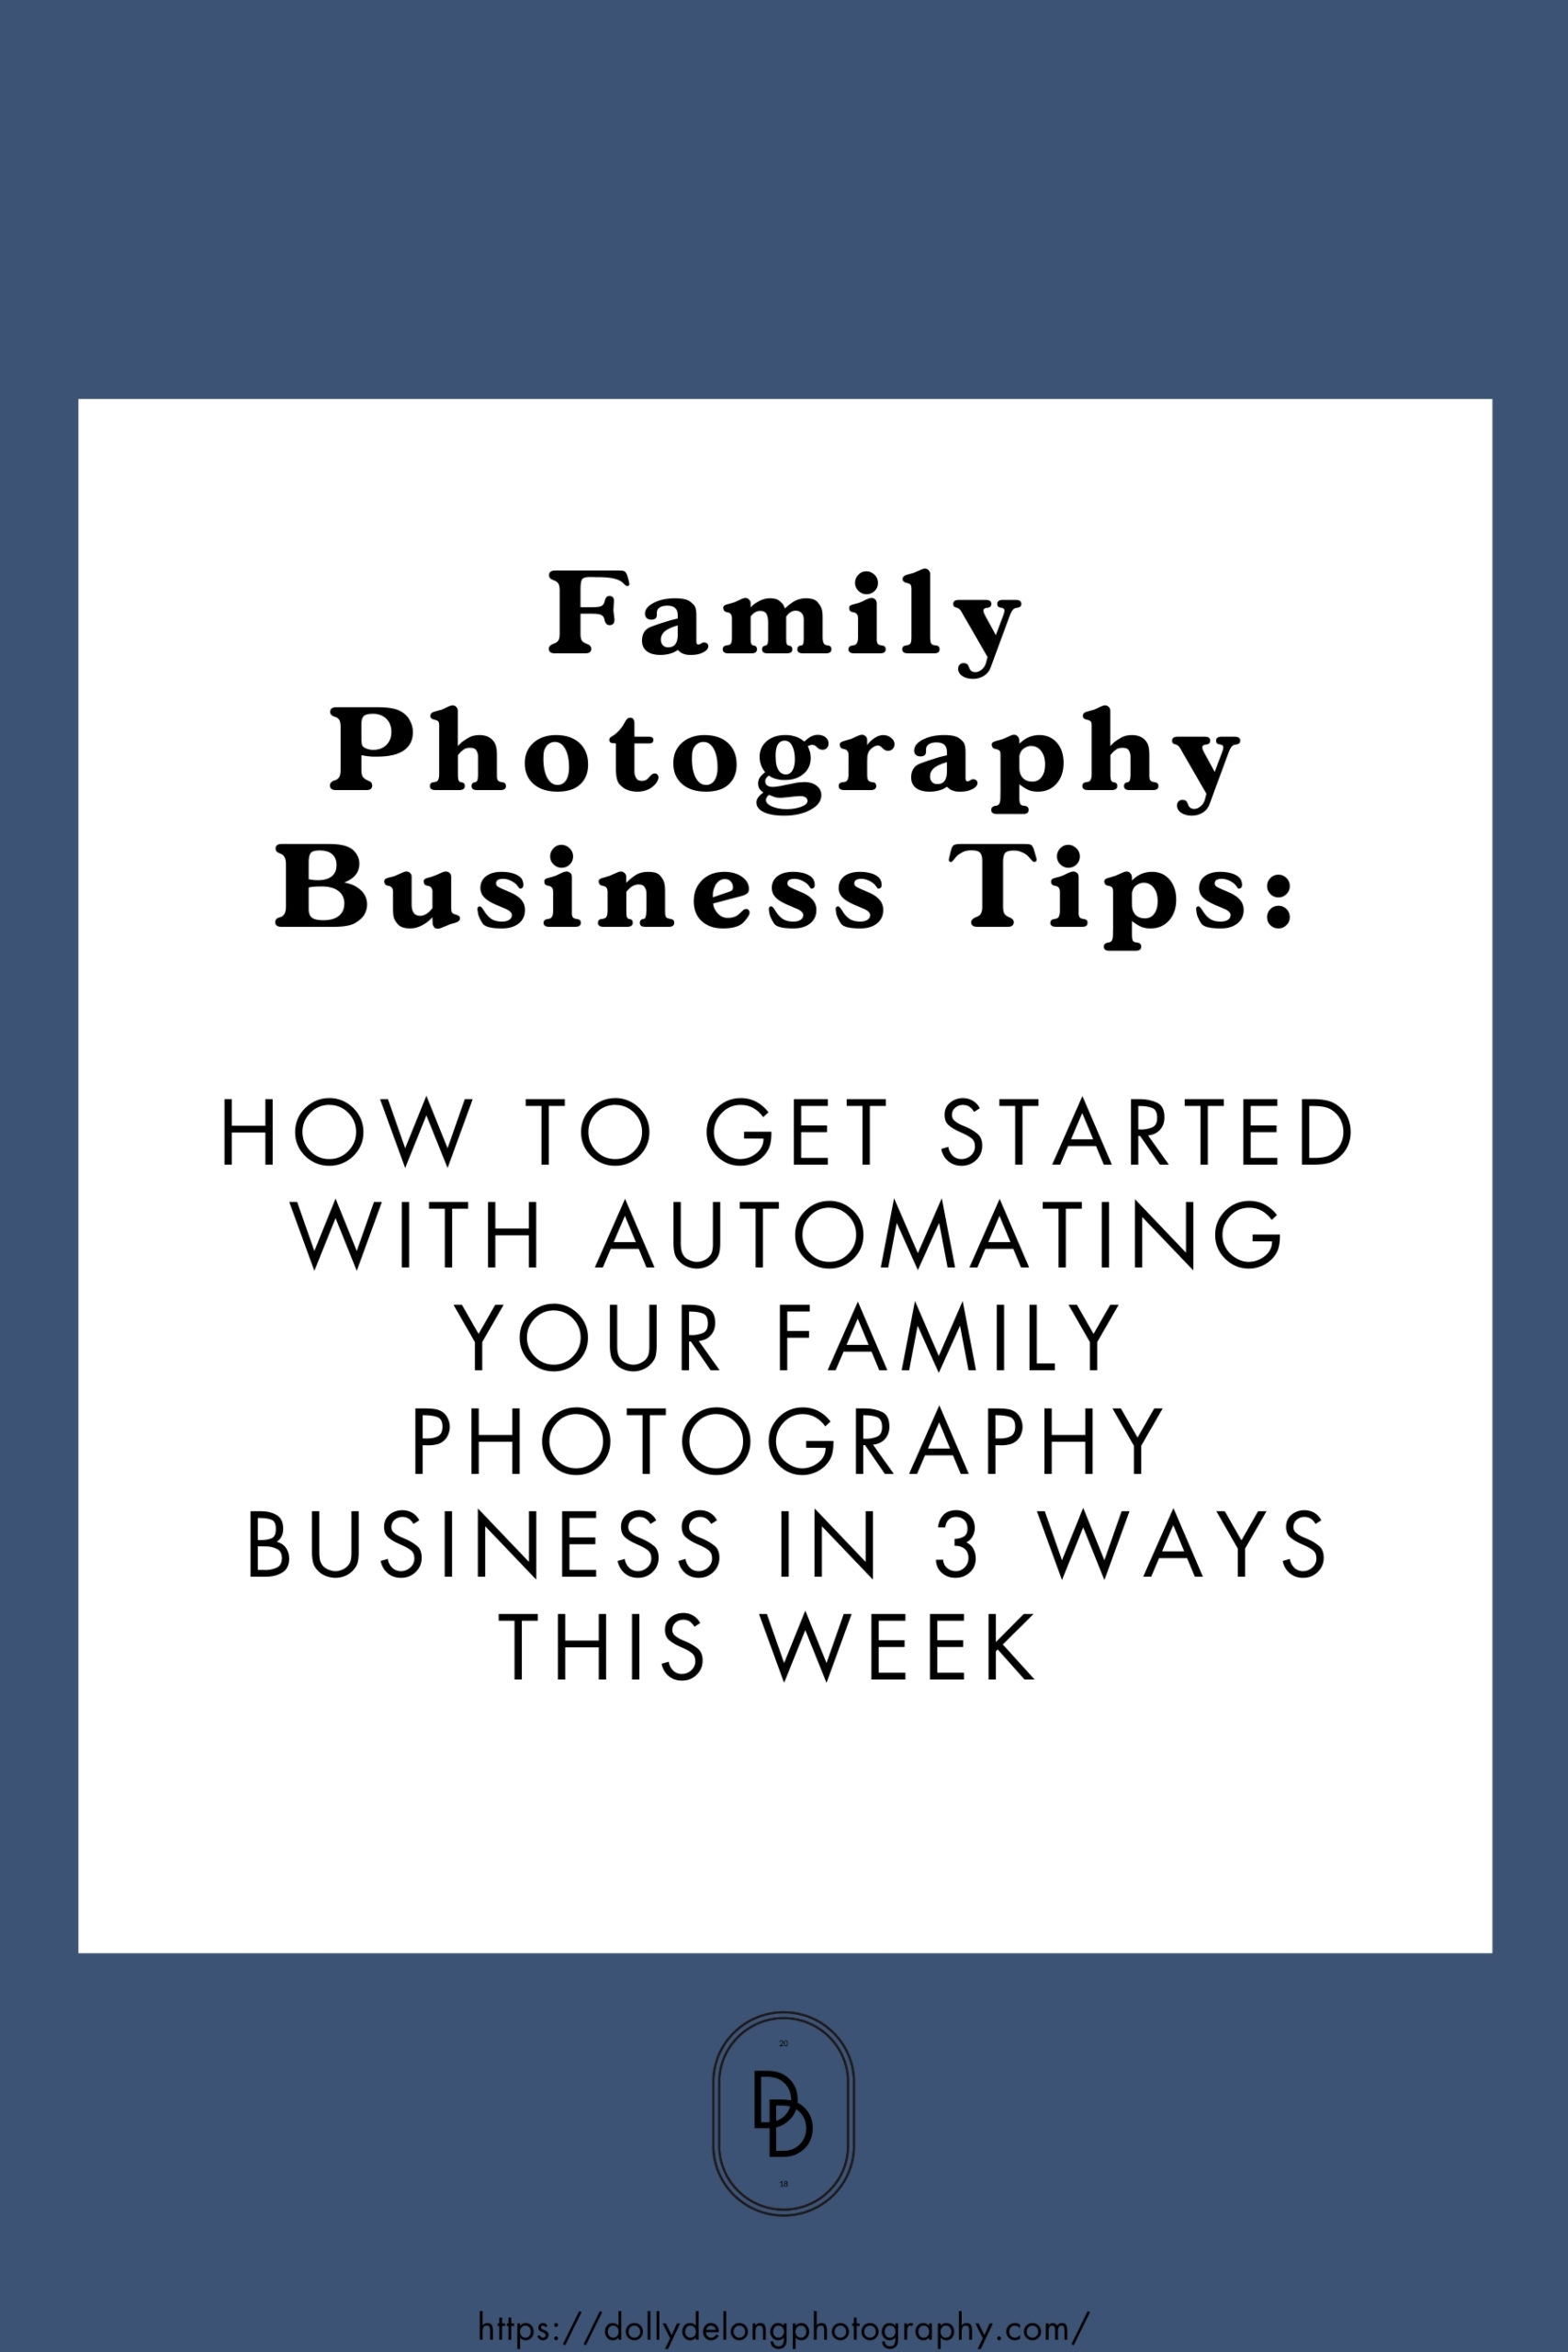 family-photography-business-tips-how-to-get-started-with-automating-your-family-photography-business-in-3-ways-this-week